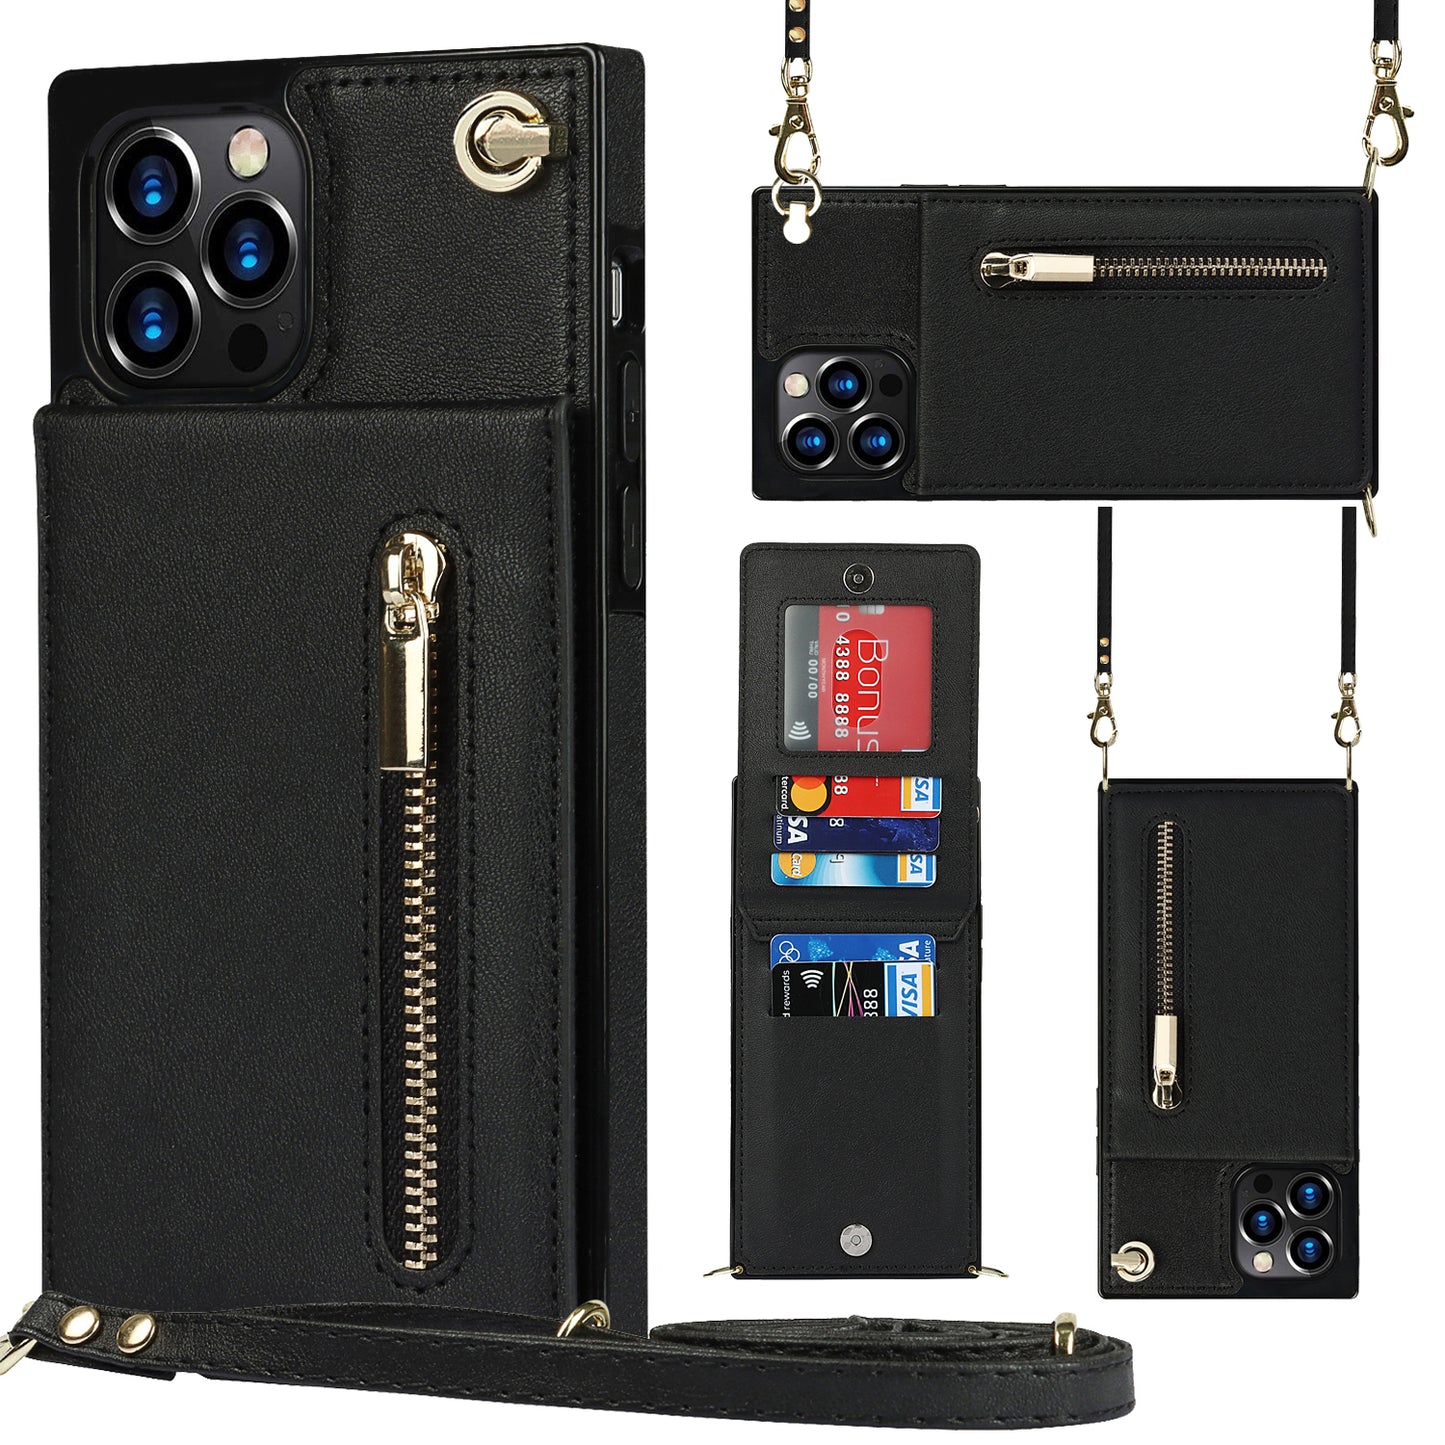 Apple iPhone 12 Pro Leather Cover with Classical Card Cash Slots Zipper Hand Shoulder Strap Kickstand